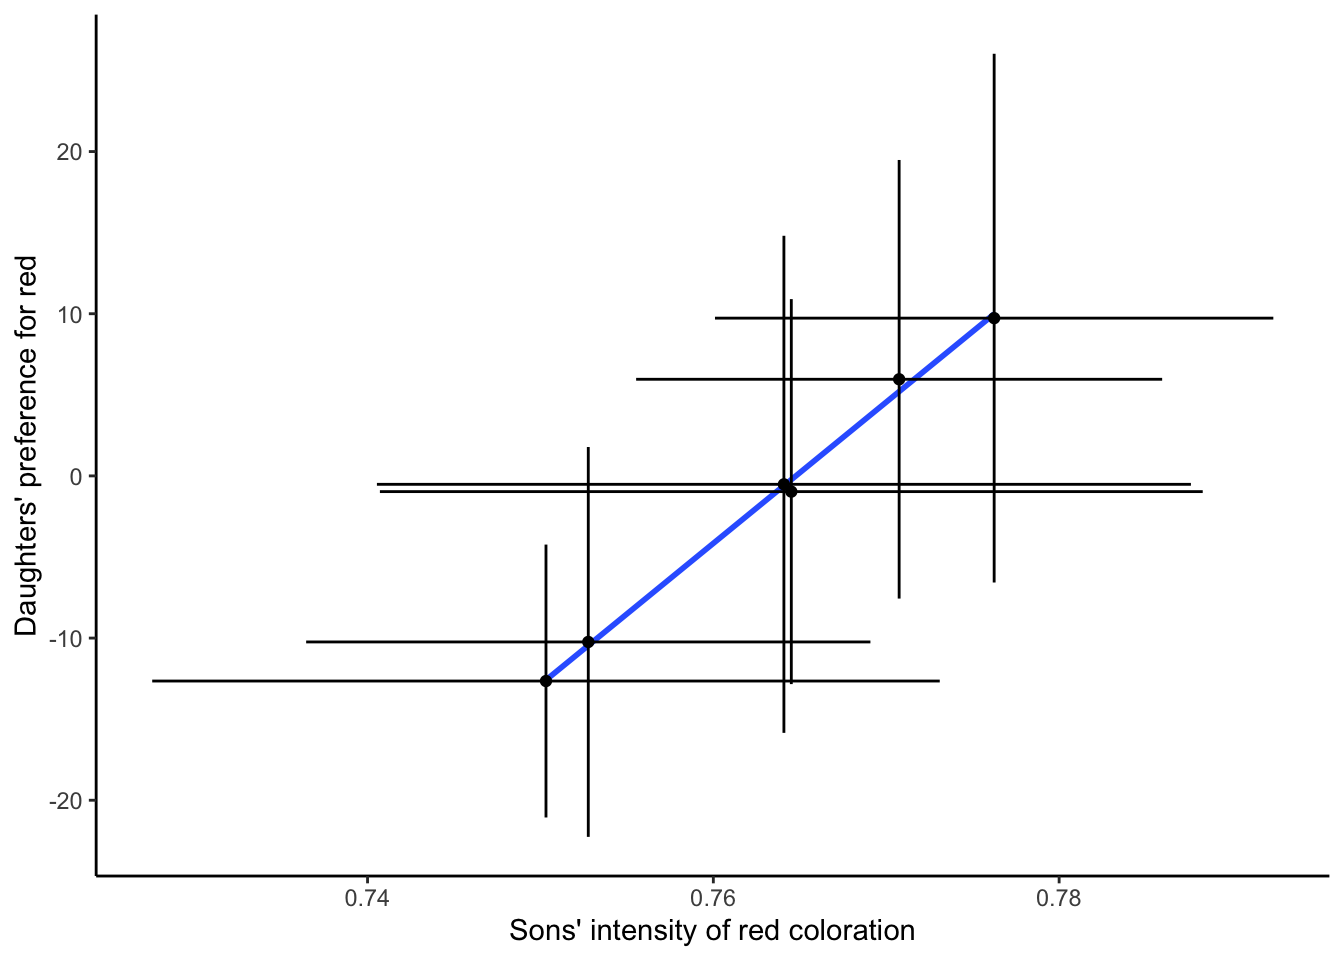 Correlation between the expression of a male ornament (red coloration) and the corresponding female preference in crosses of stickleback. [Data](data/10_gencorrel.csv) from Bakker (1993).